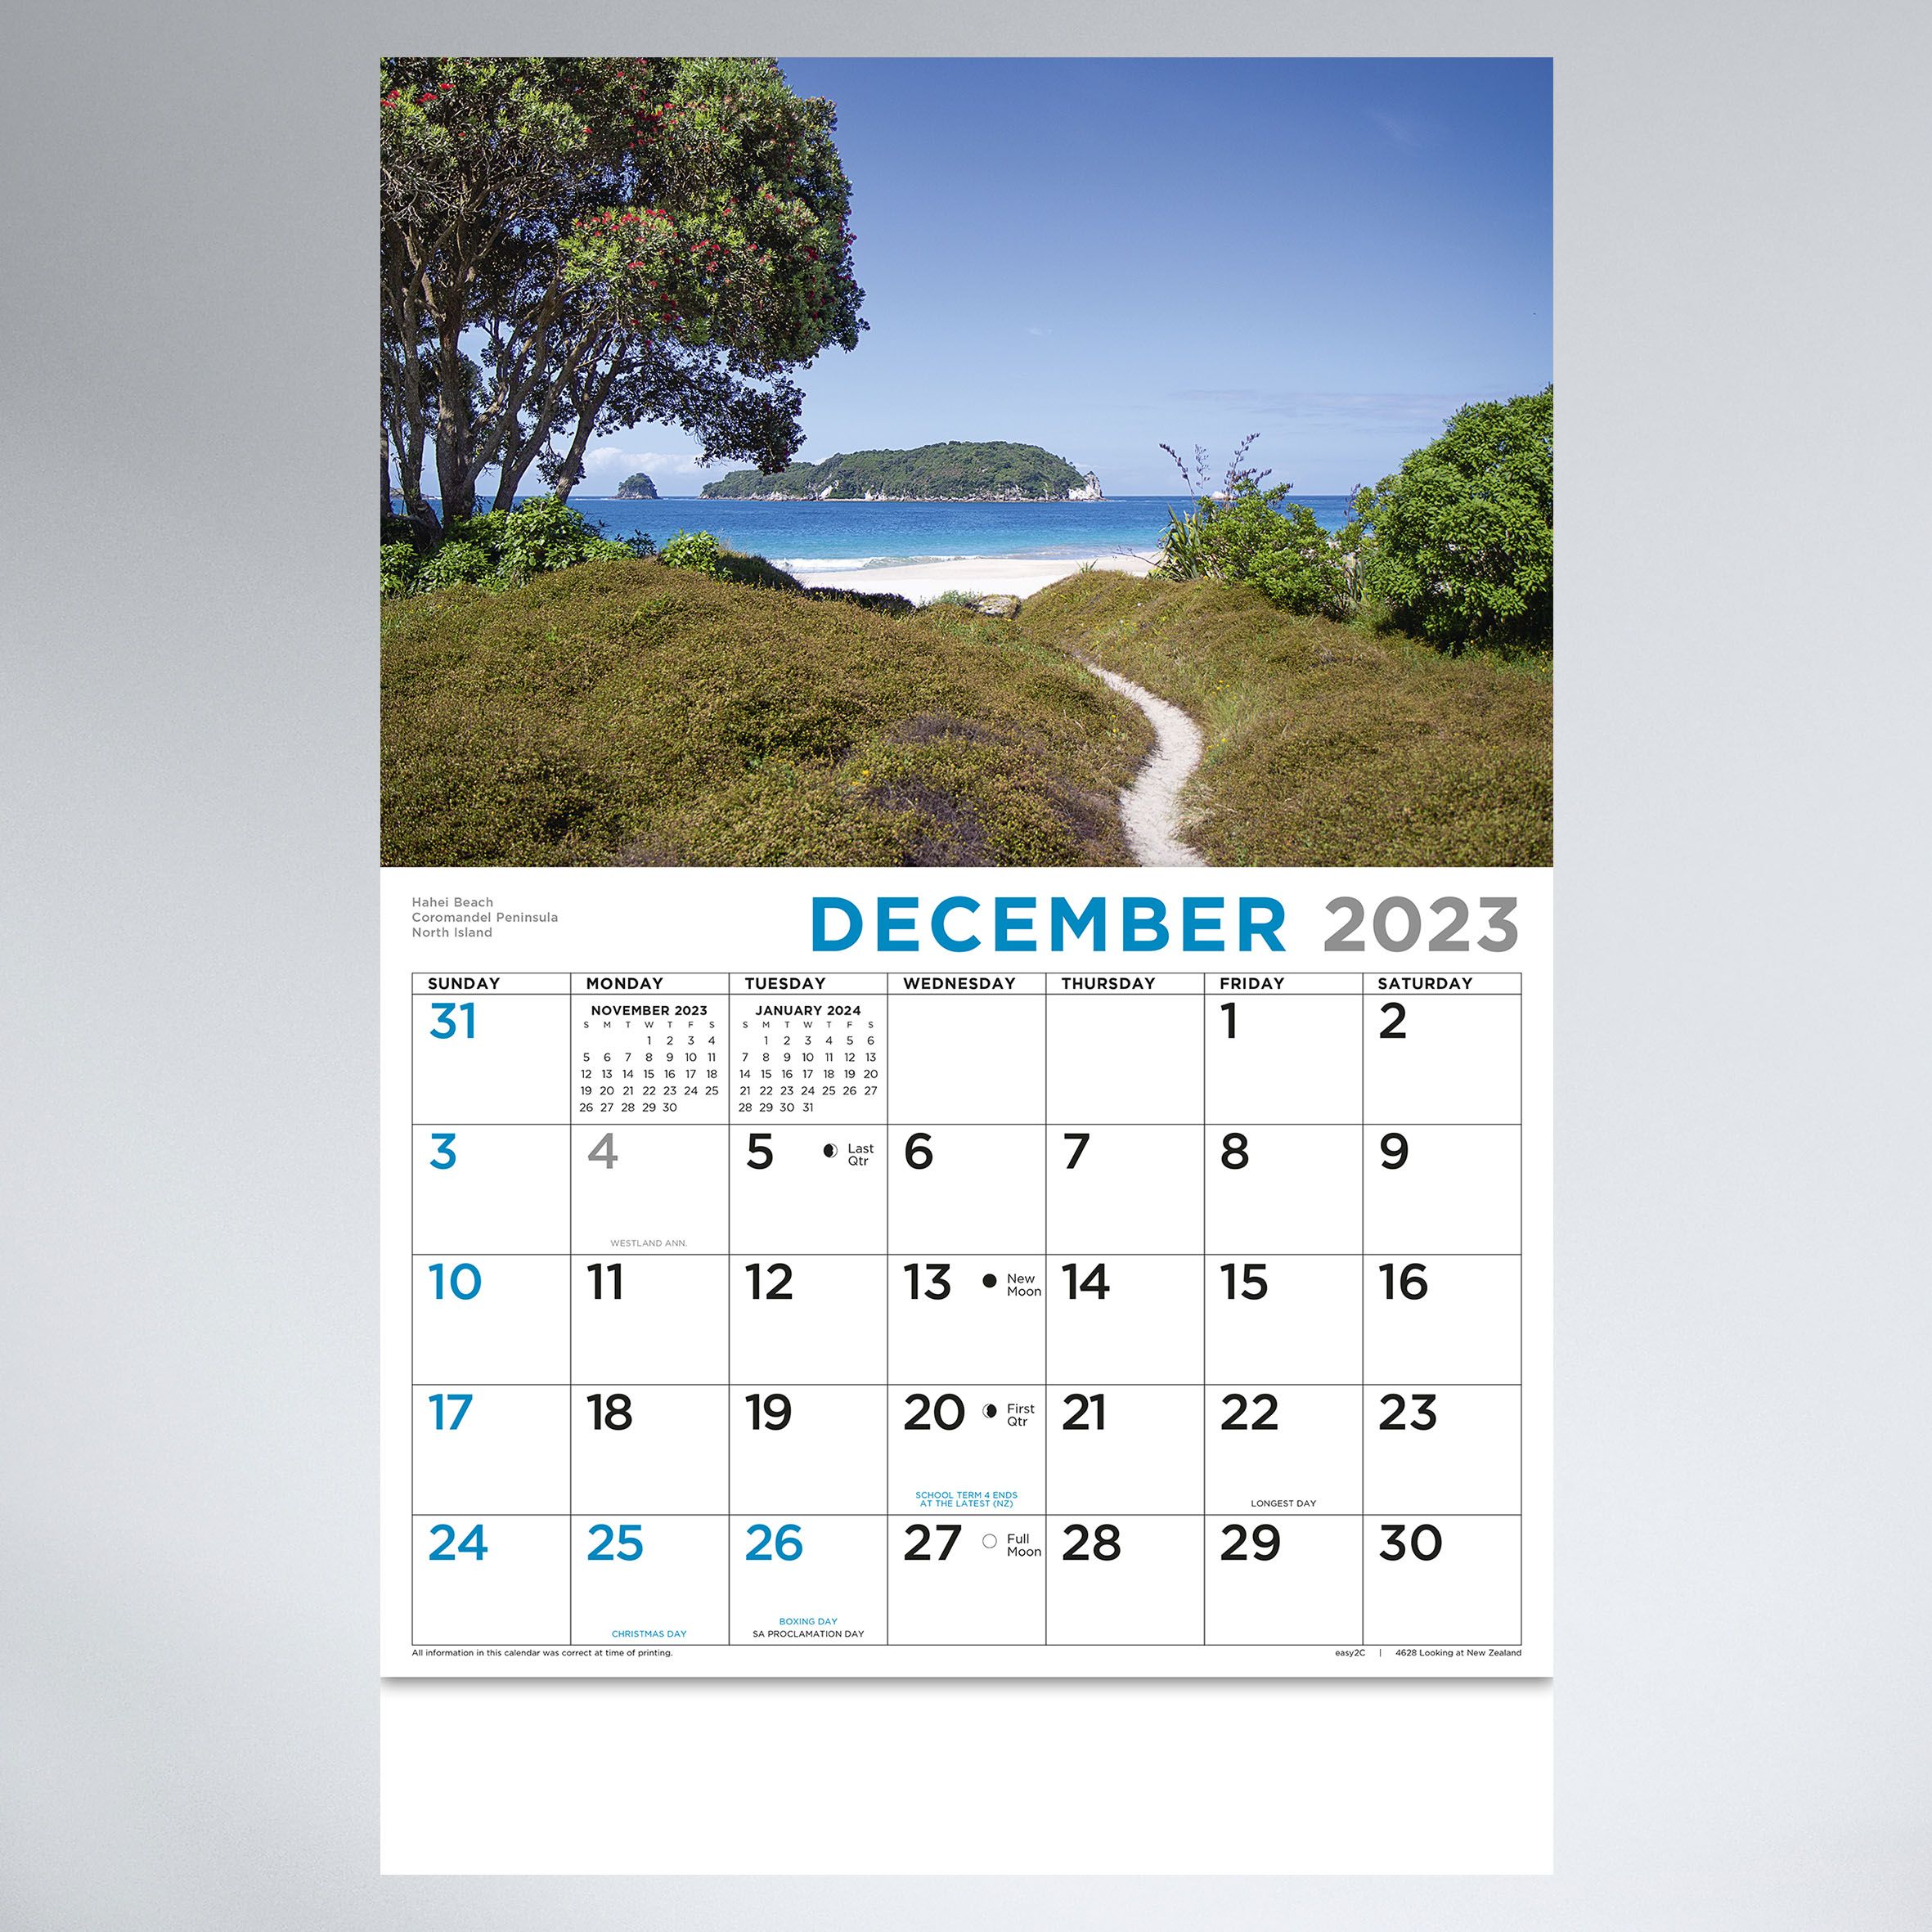 4628_Looking_at_NZ_Booklet_13